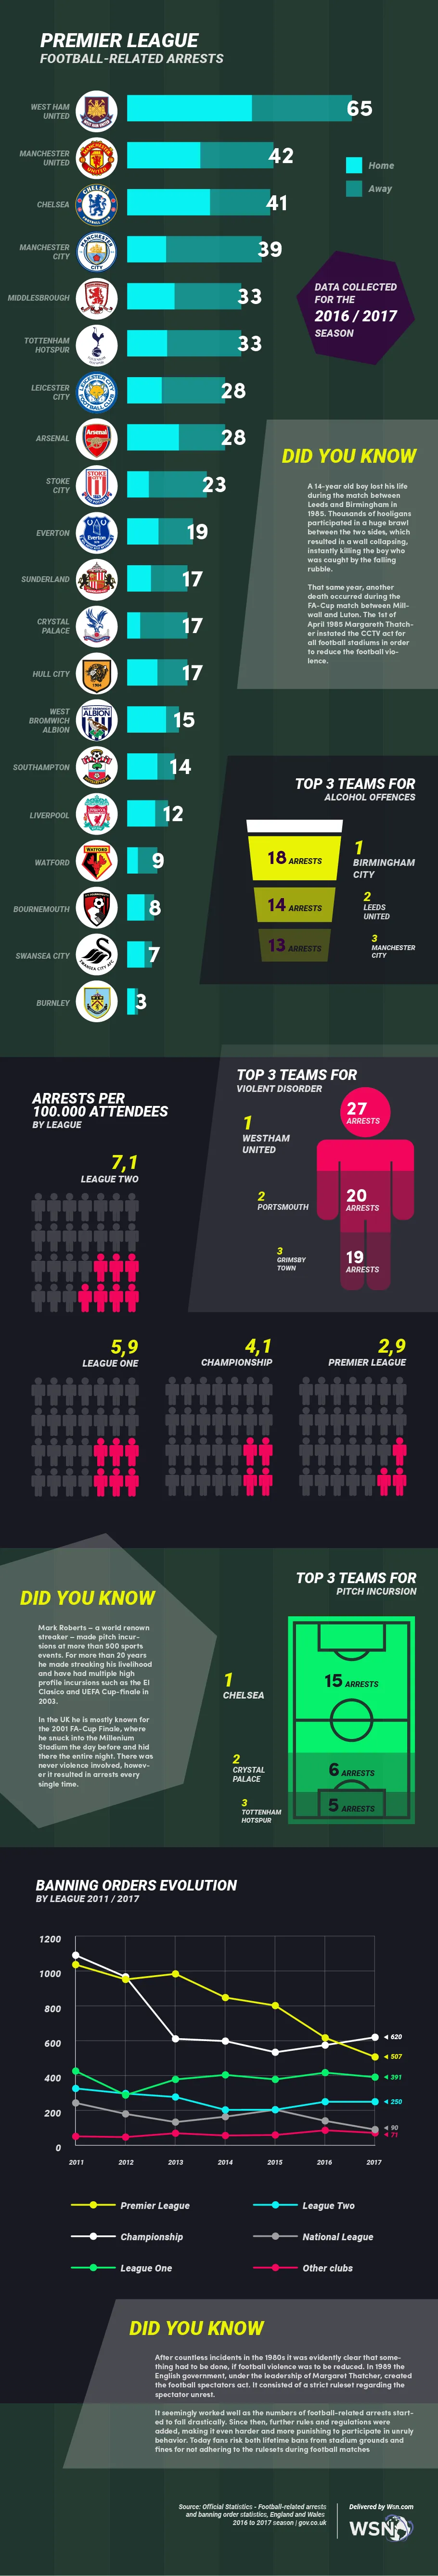 Premier League Football-Related Arrests in 2016/2017 Infographic